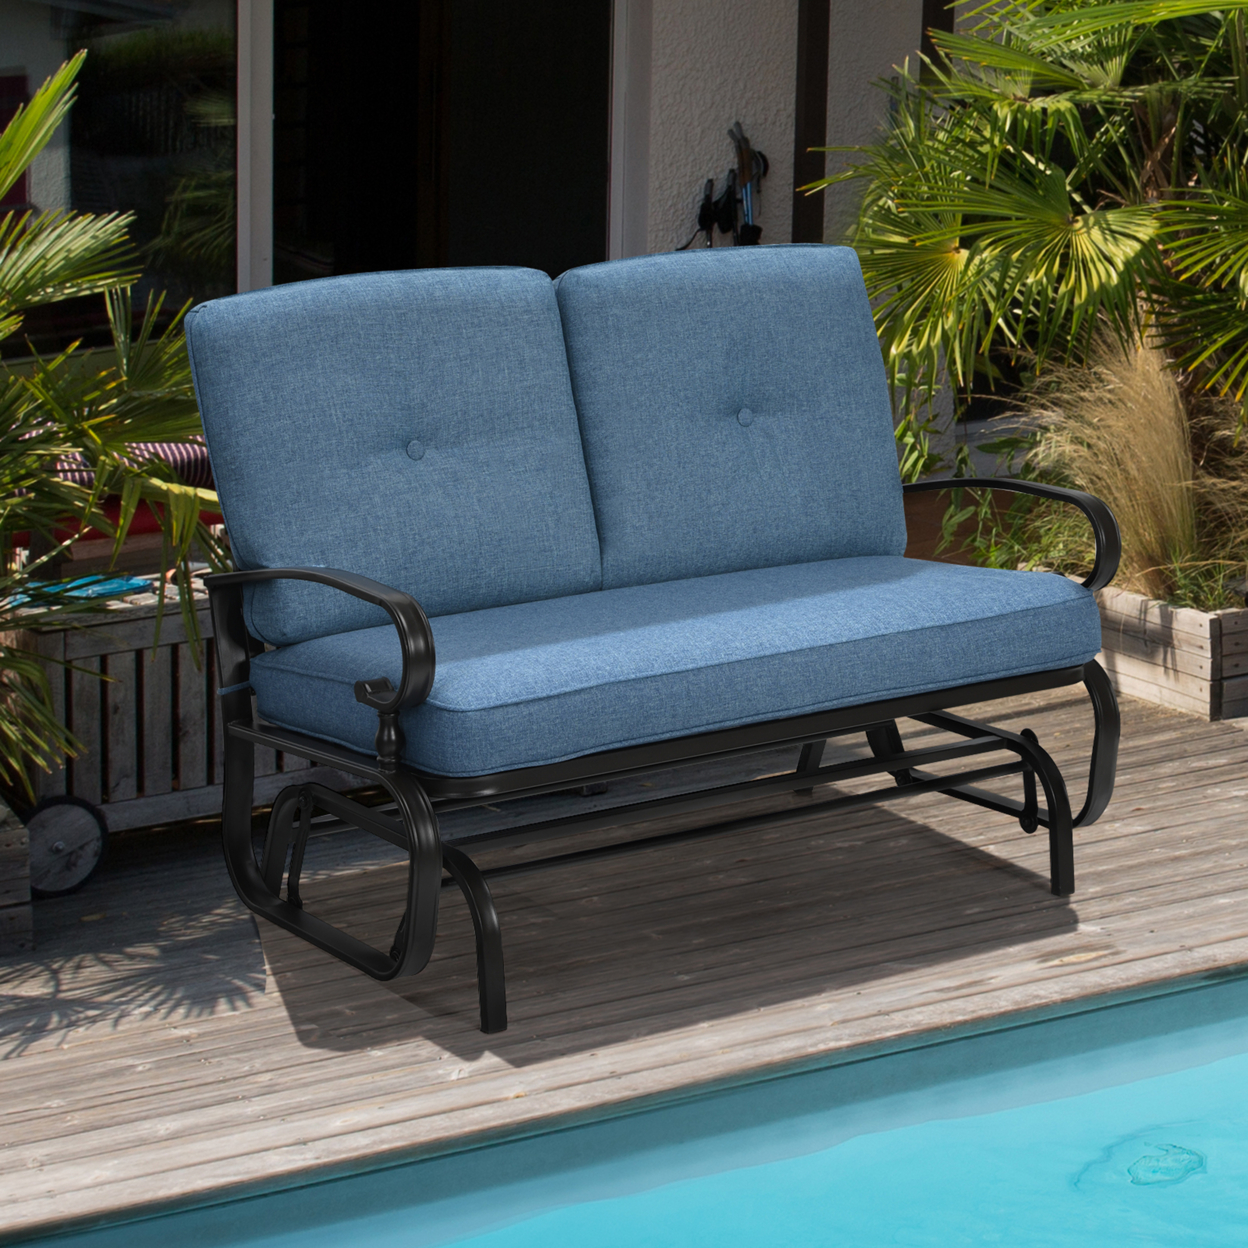 Patio Swing Glider Chair Rocking Loveseat Bench For 2 Persons W/ Blue Cushions